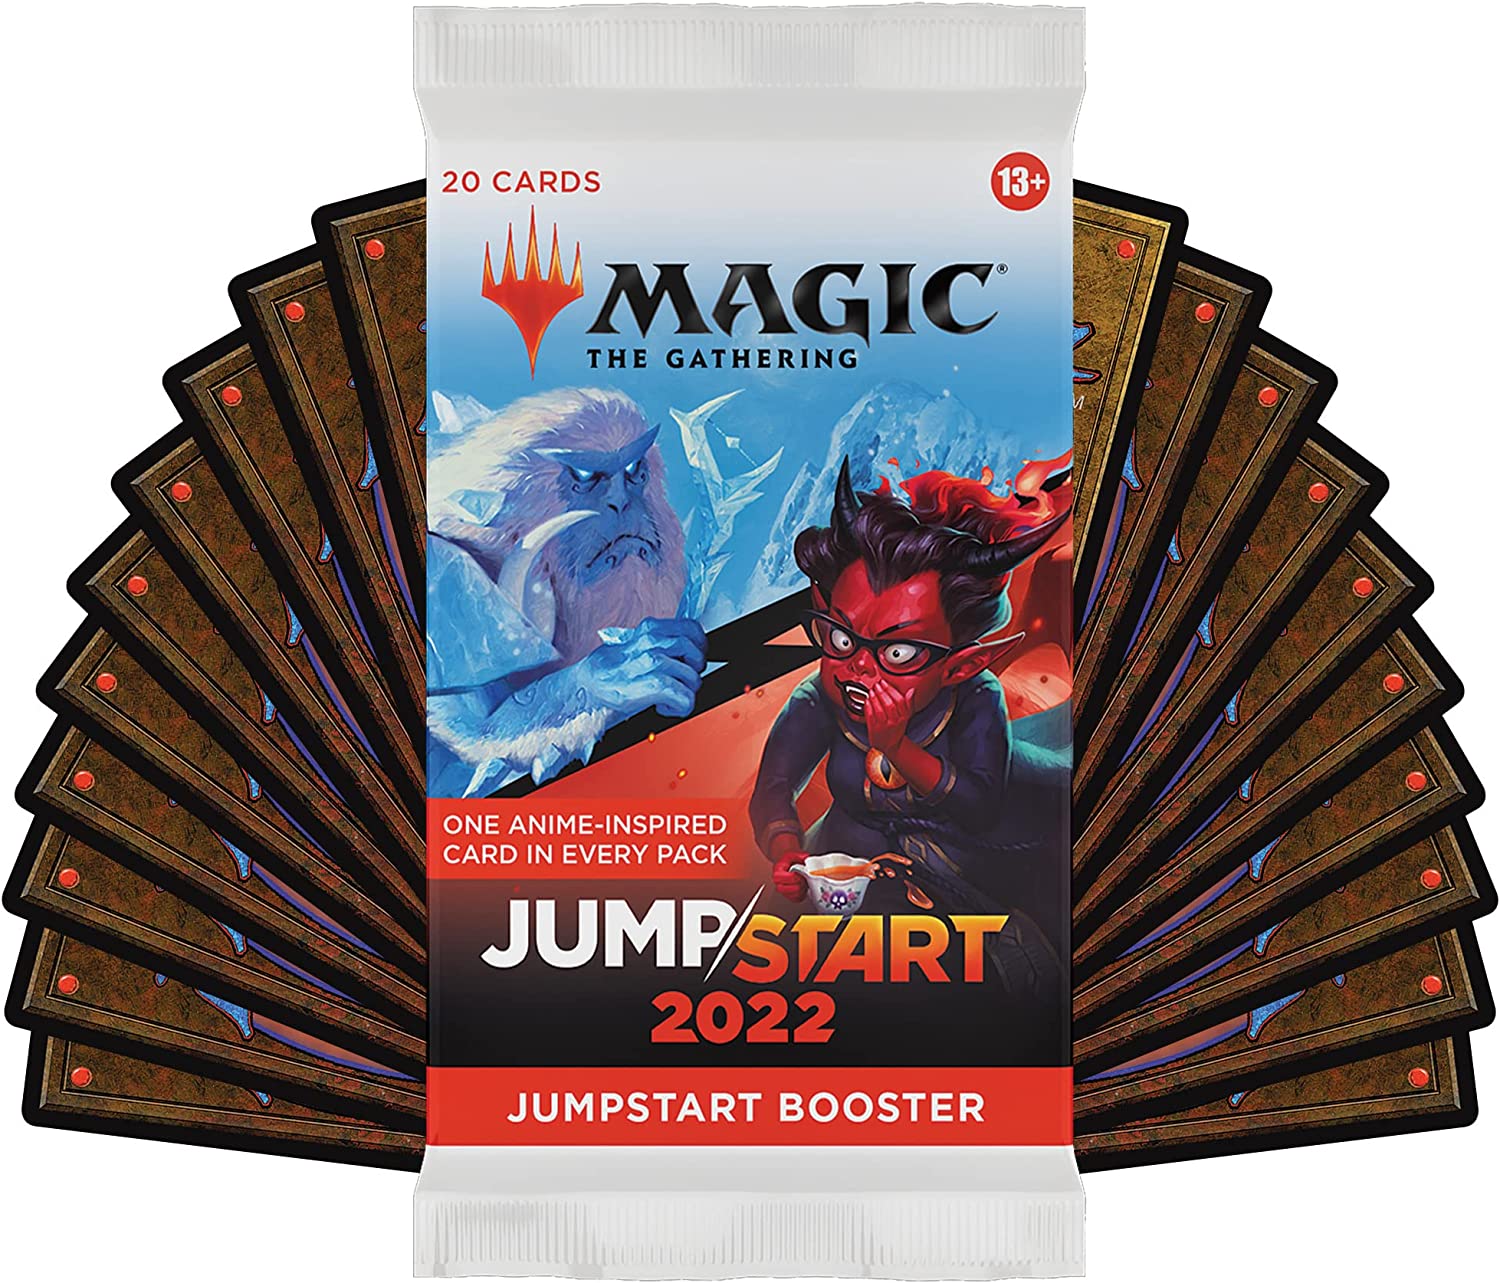 EXCLUSIVE: Magic: The Gathering Adds All-New Cats and Demons in Jumpstart  2022